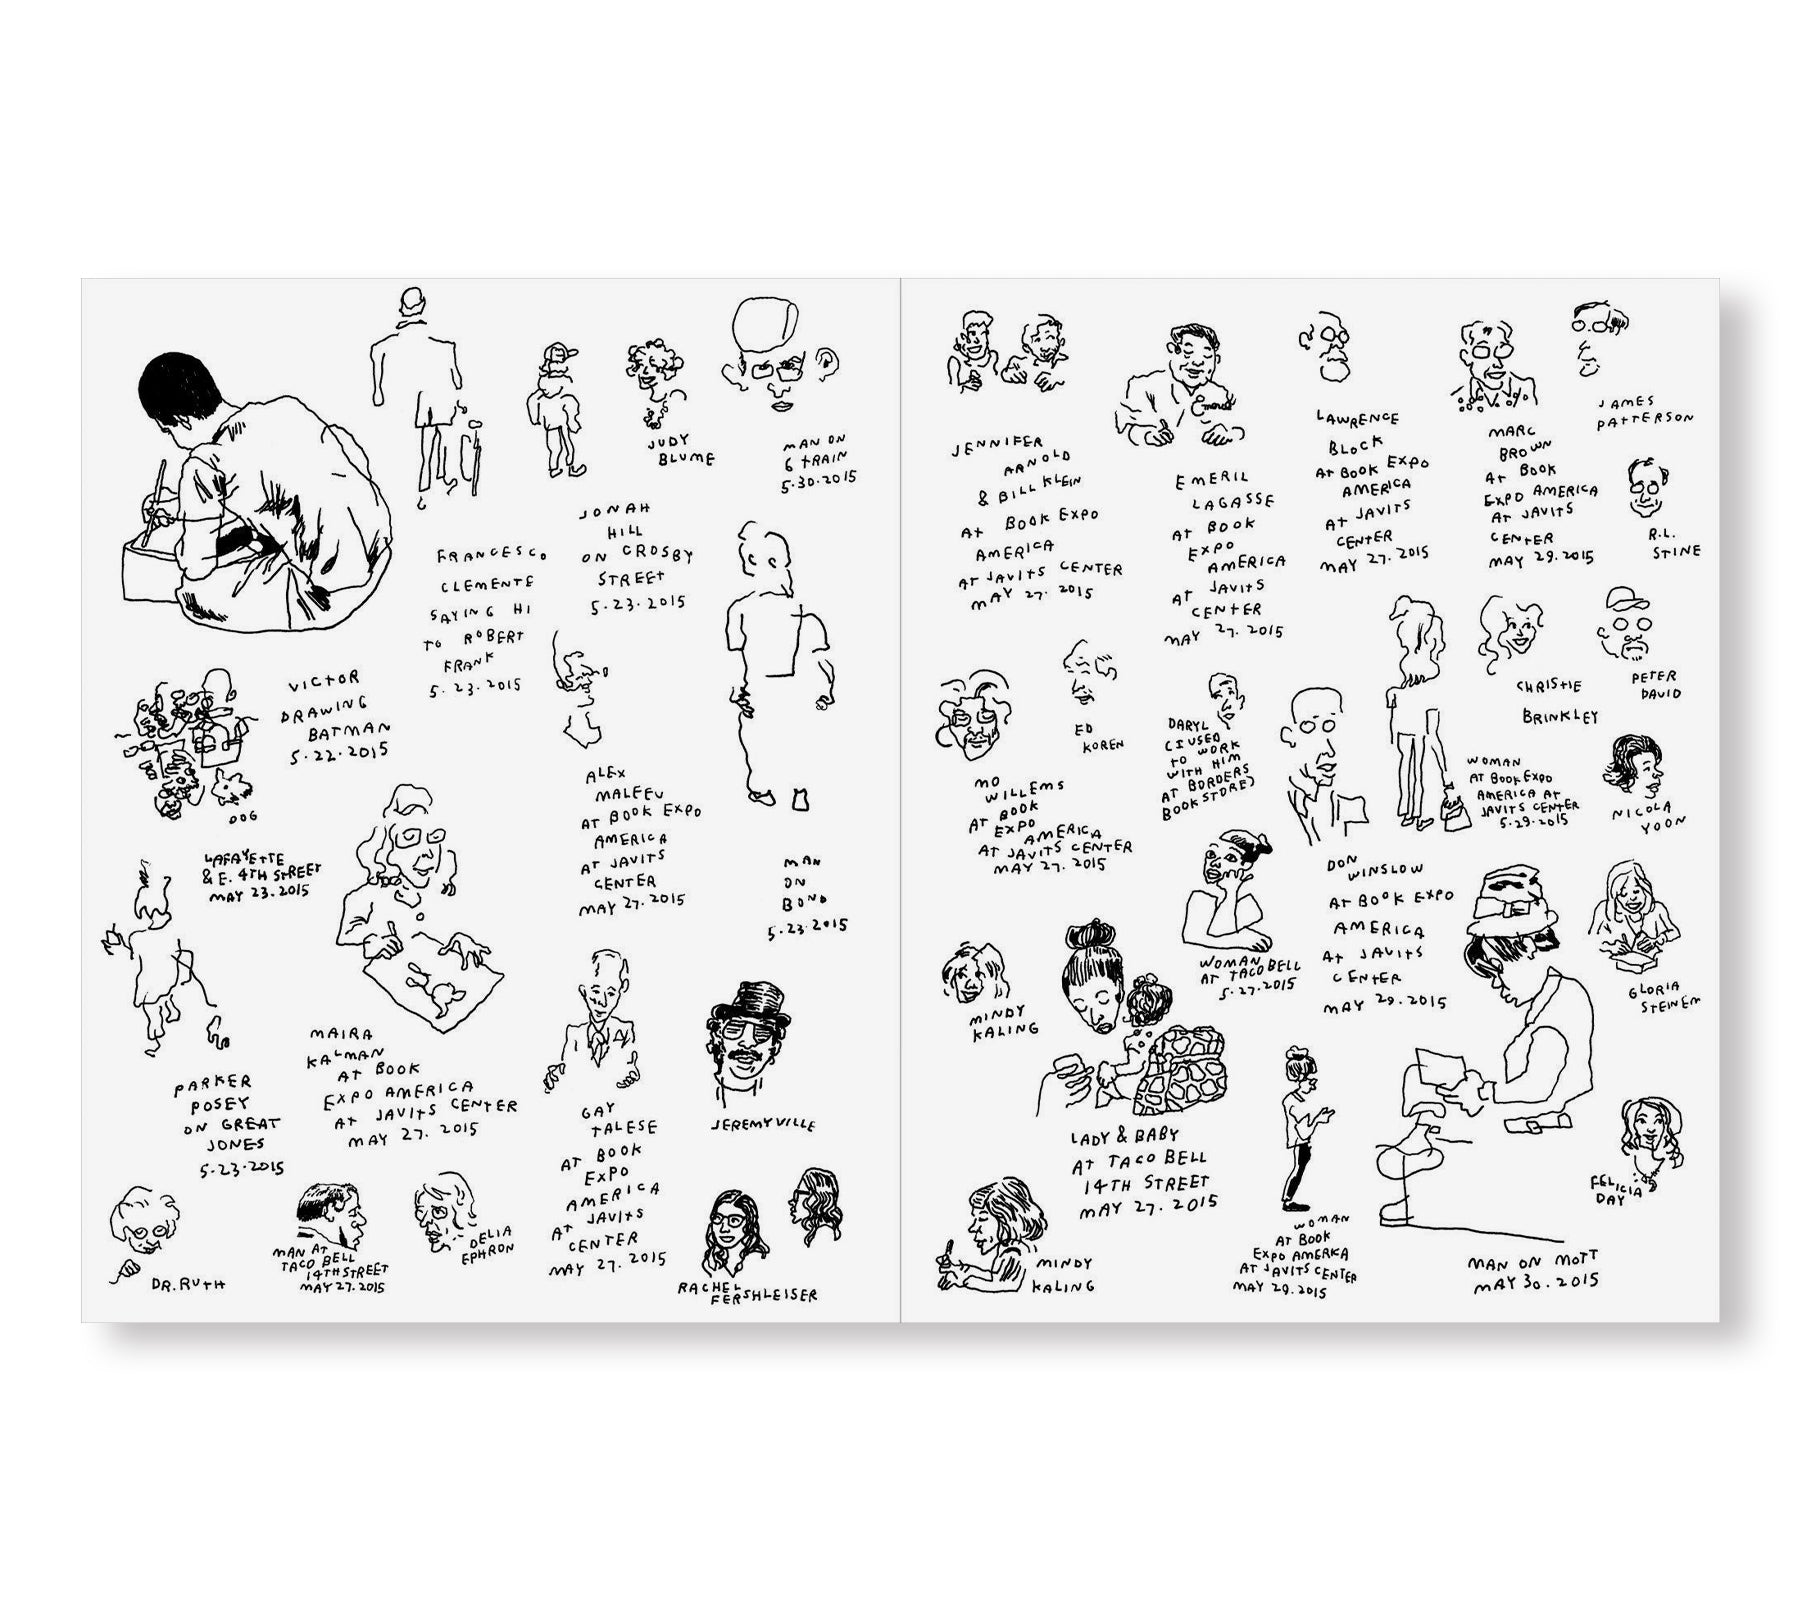 EVERY PERSON IN NEW YORK VOL 2 by Jason Polan